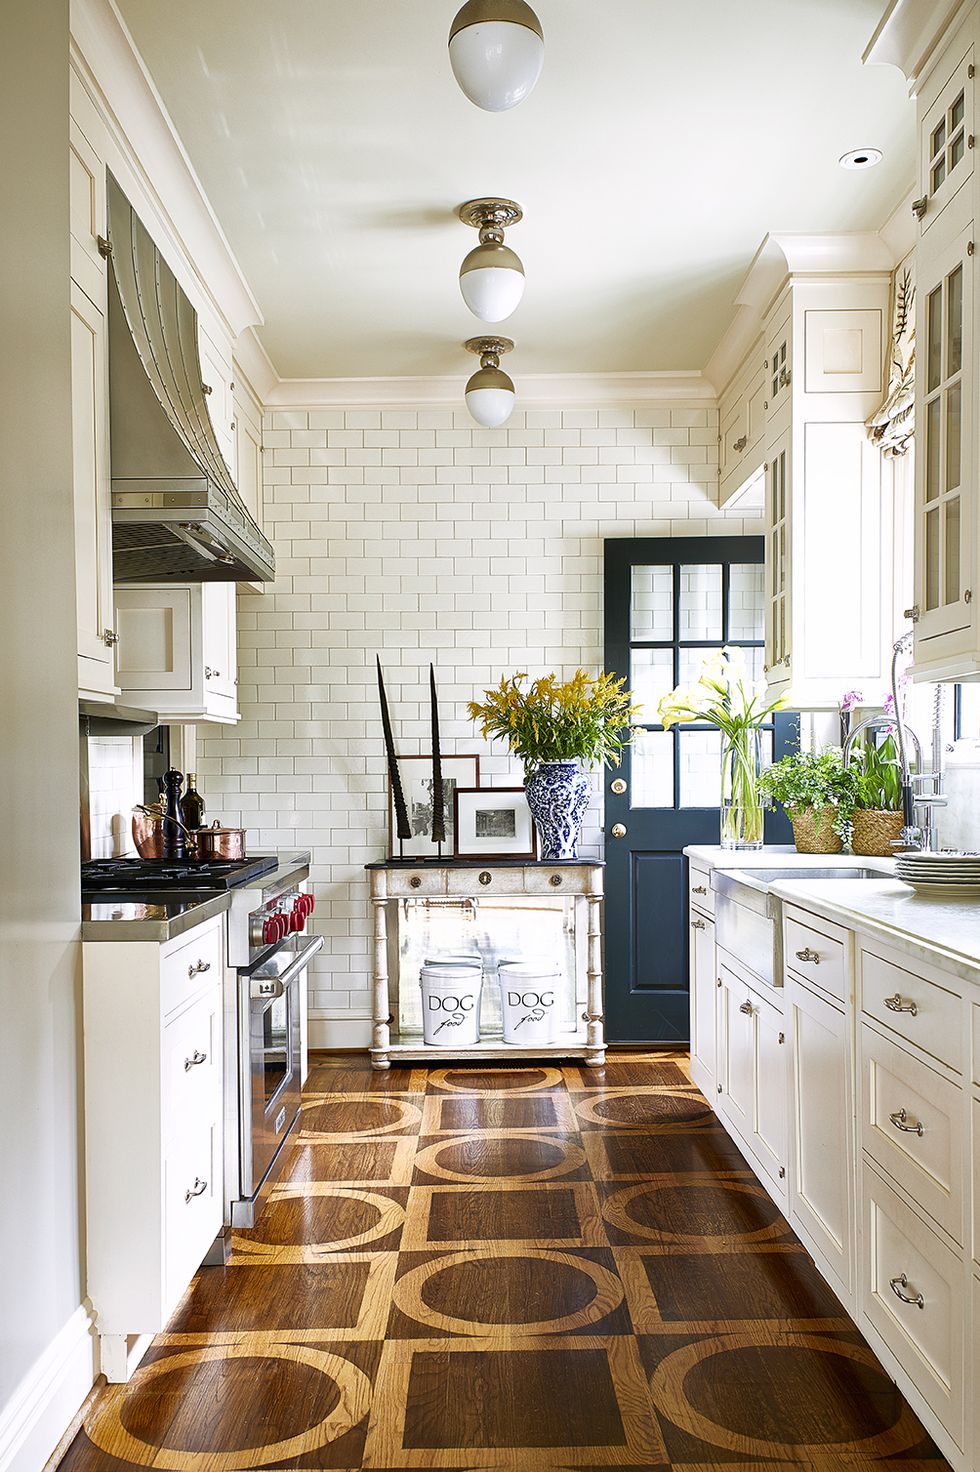 27 Chic French Country Kitchens